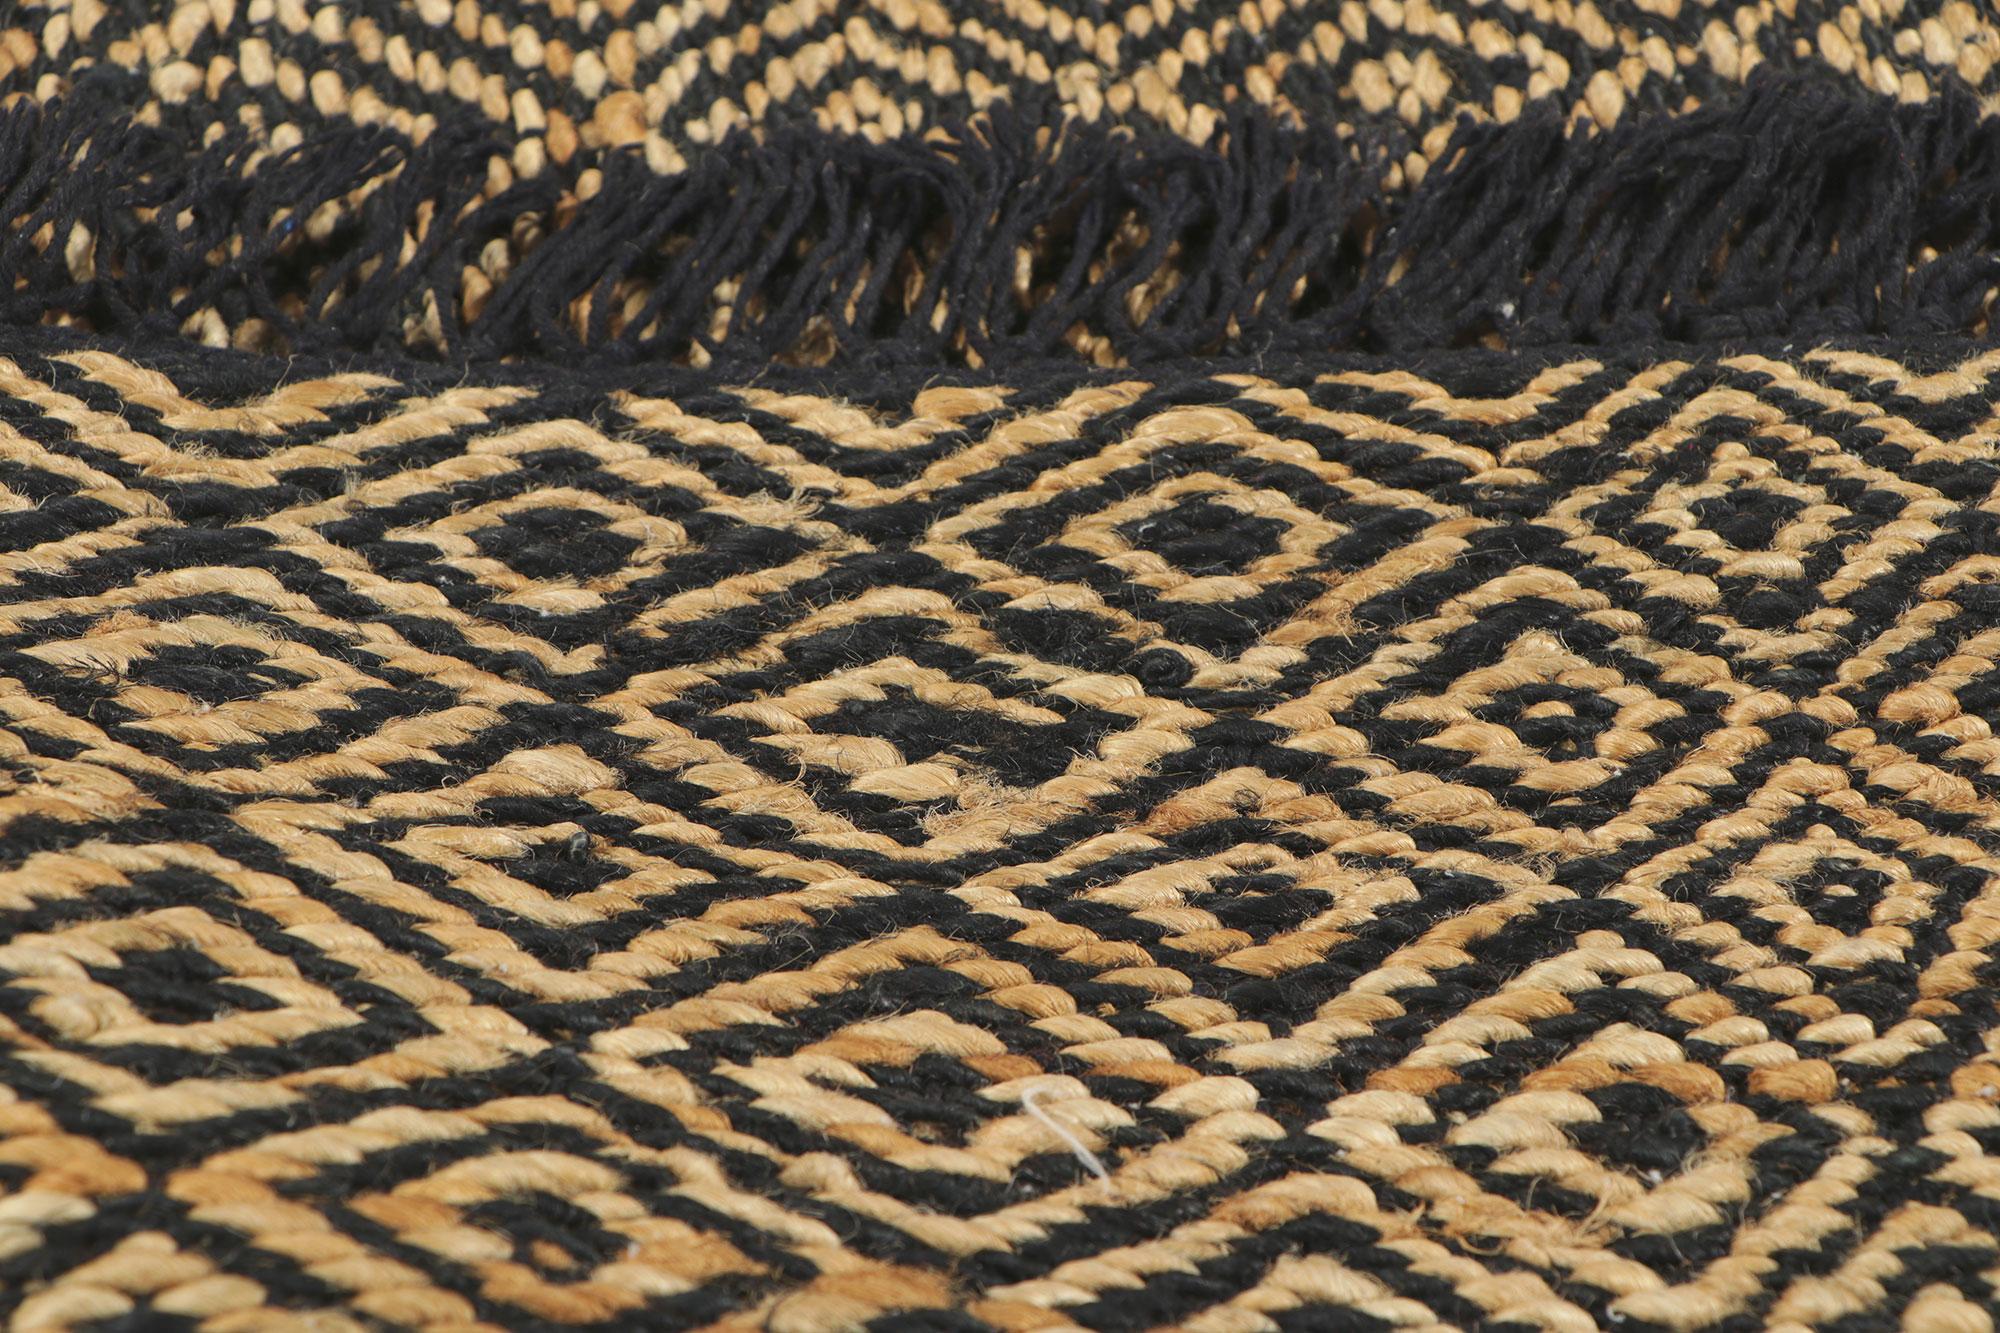 New Handwoven Natural Fiber Jute Rug In New Condition For Sale In Dallas, TX